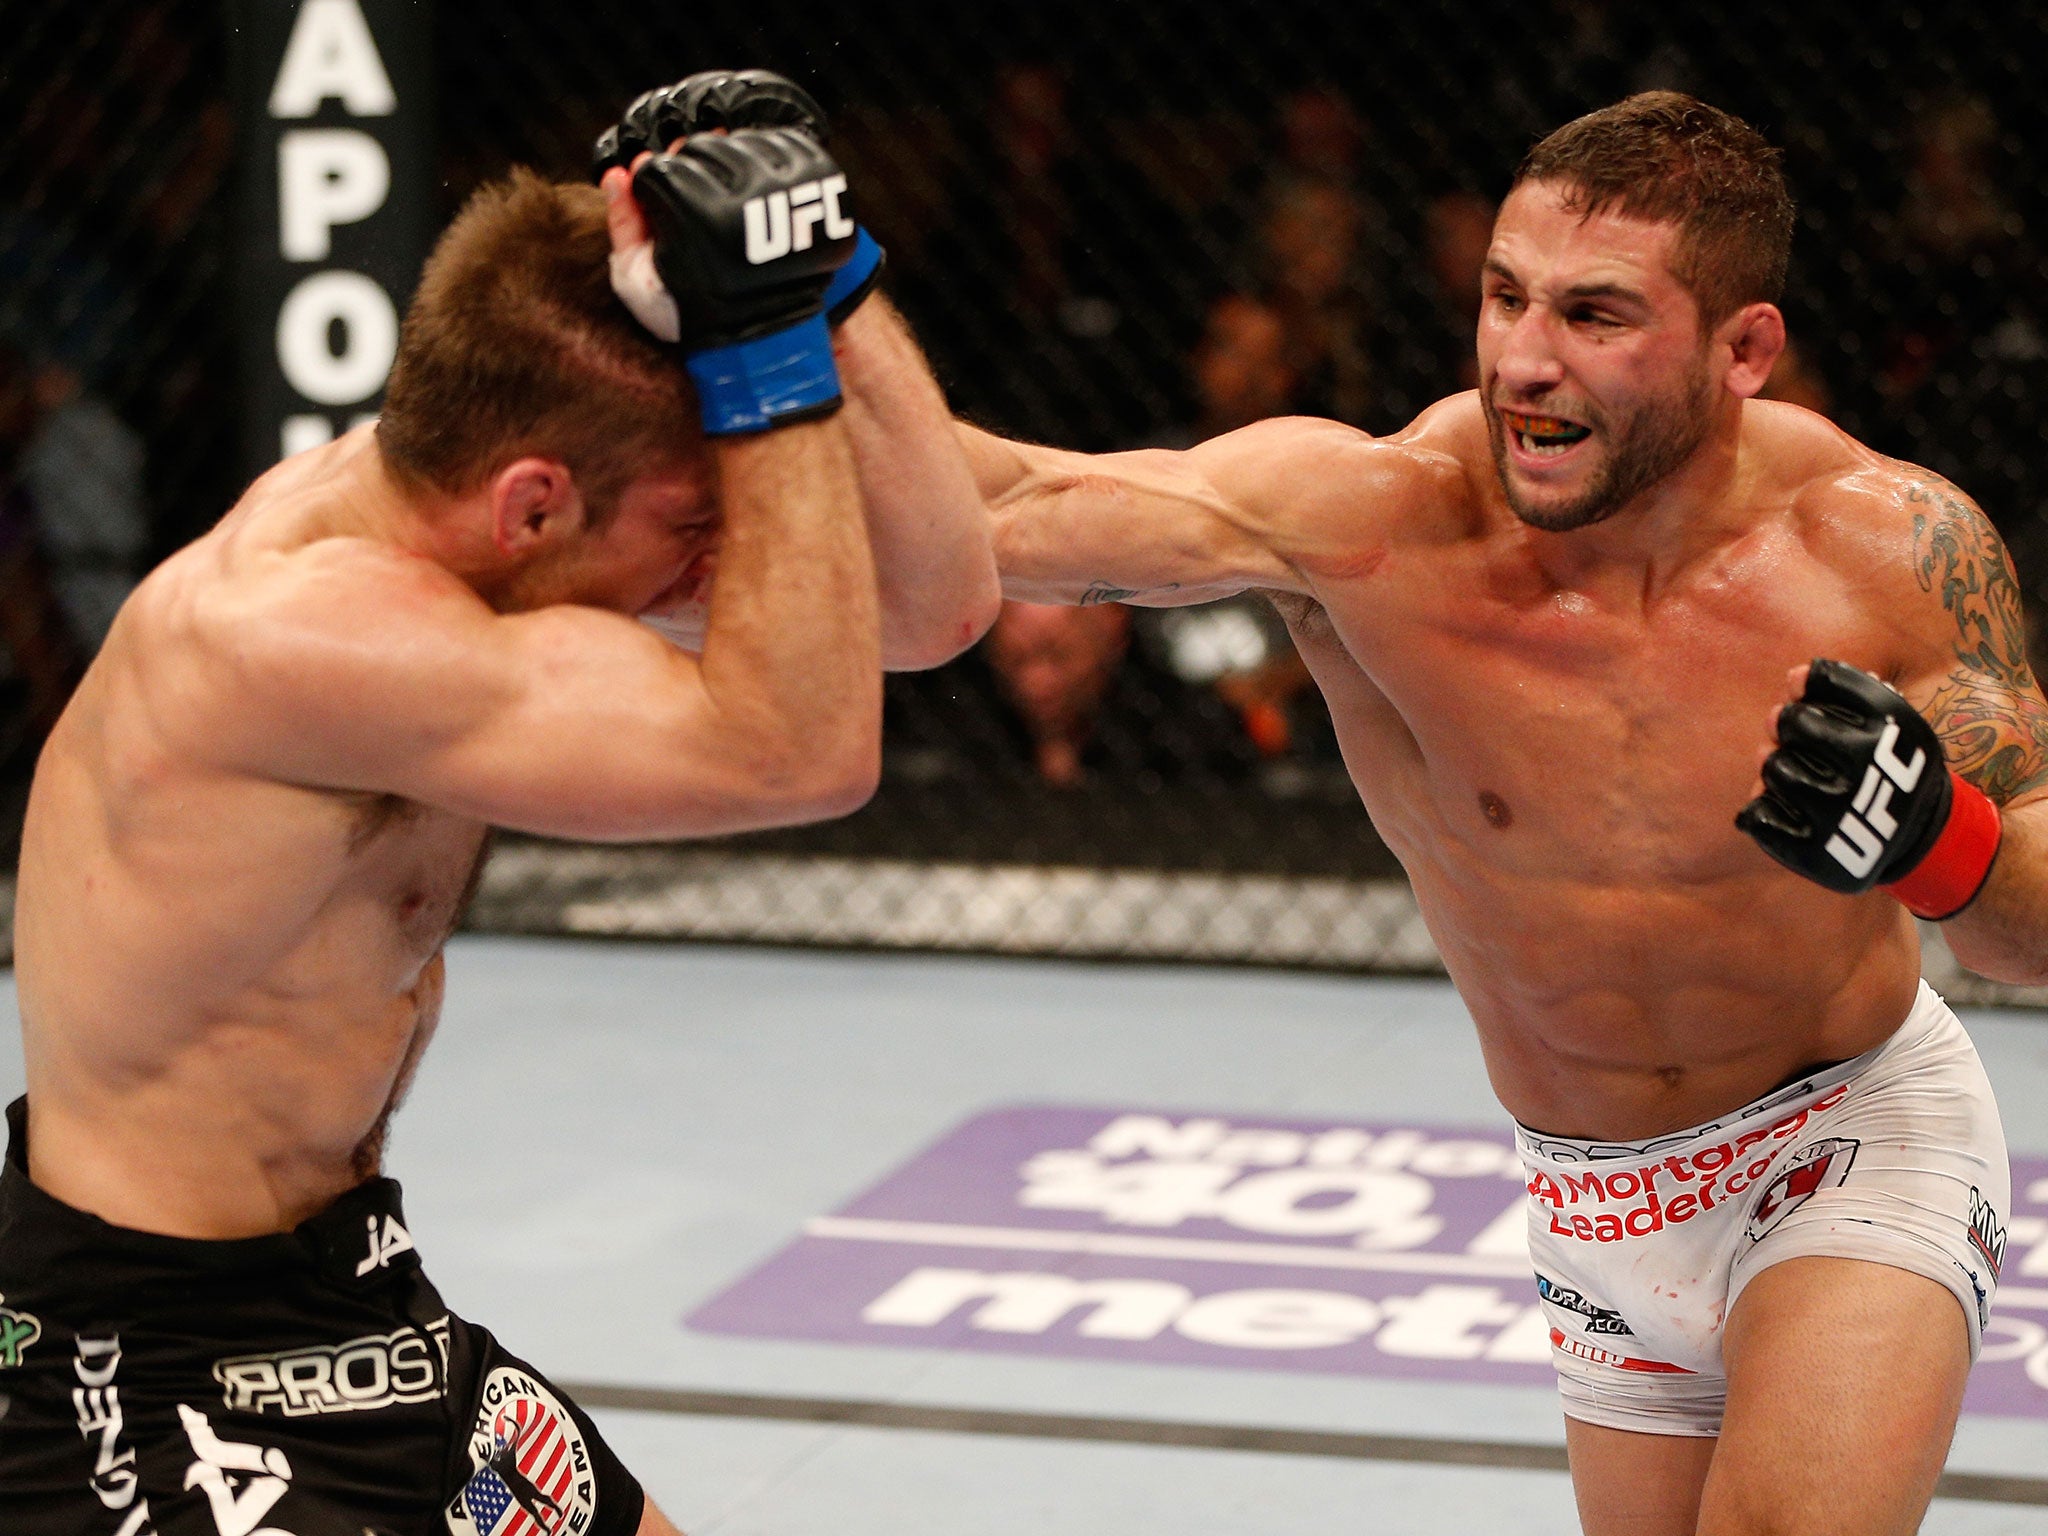 Chad Mendes (right) takes on Ricardo Lamas this weekend